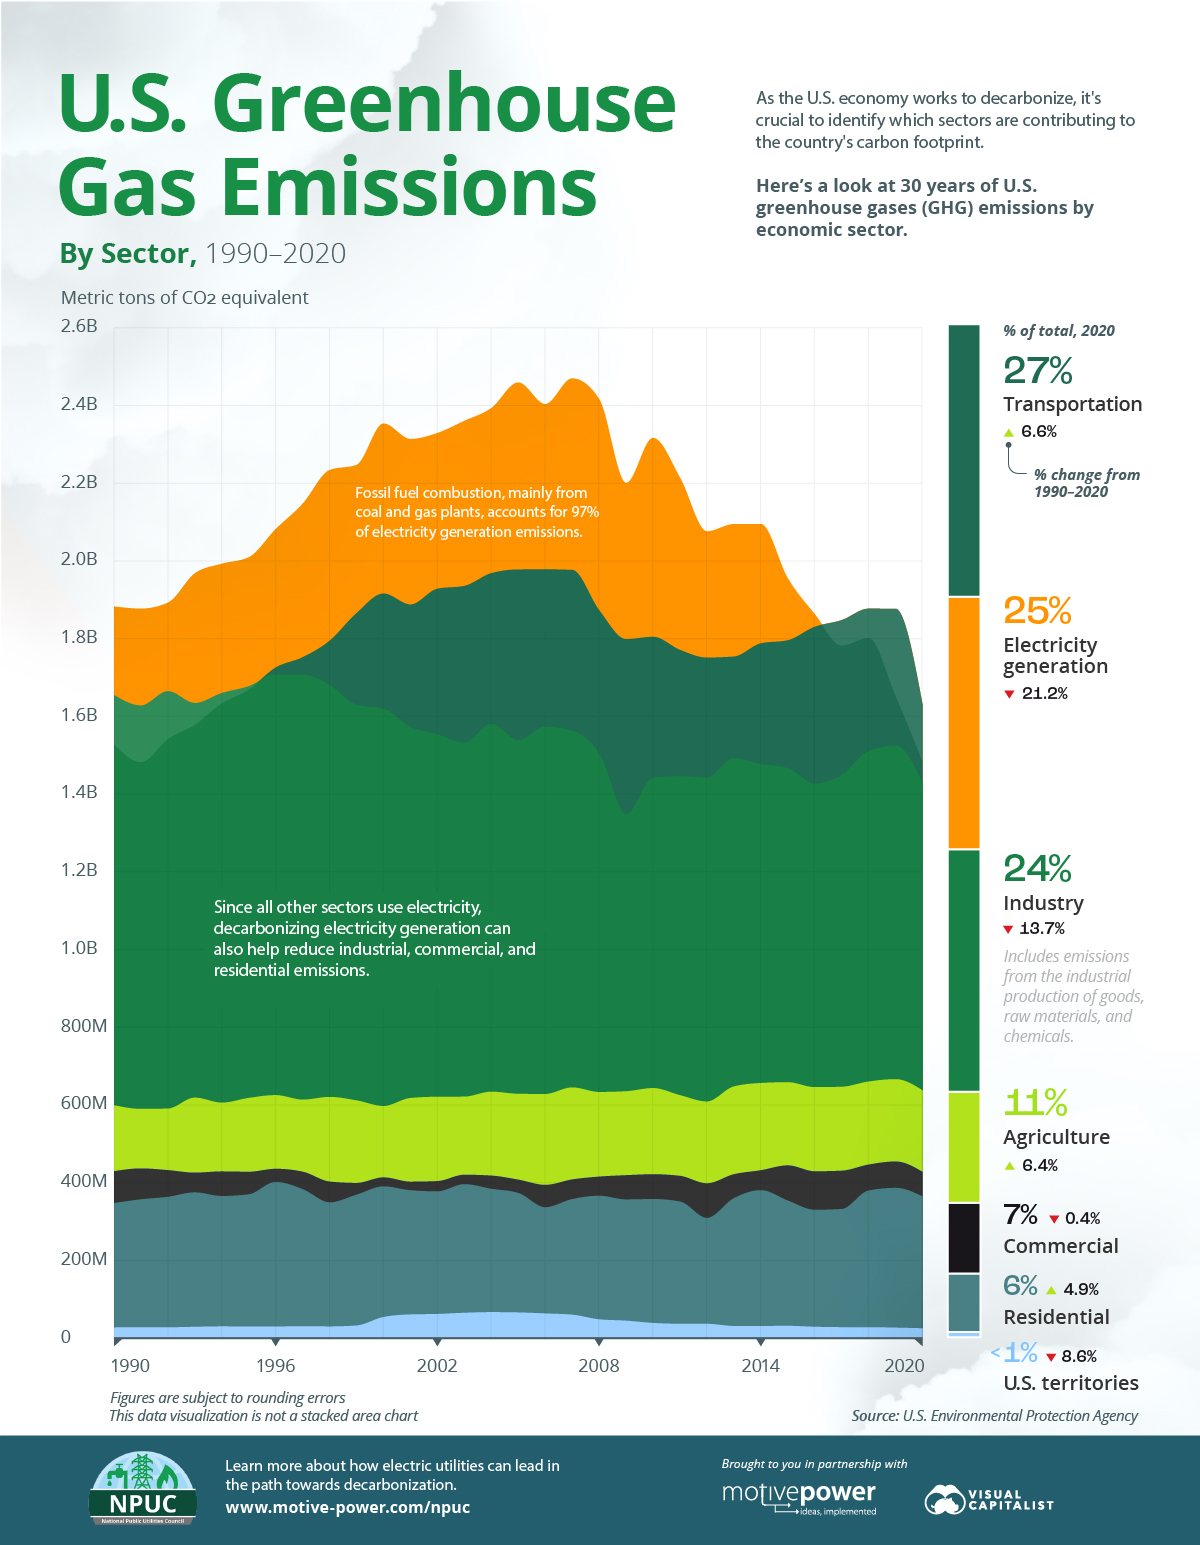 Sustainability - Environmental - Greenhouse Gas Emissions 